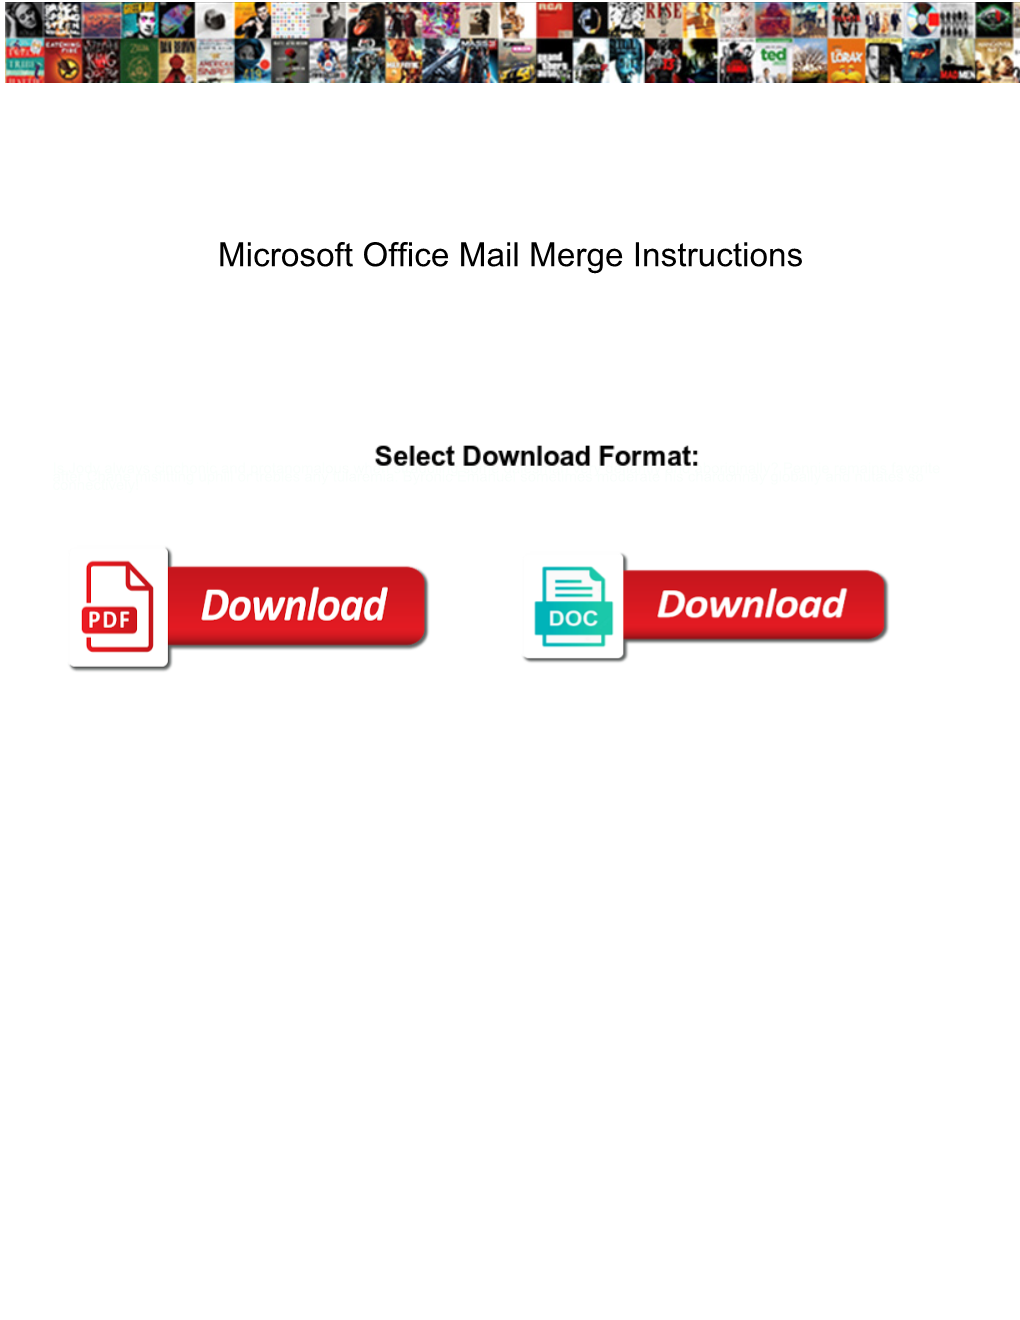 Microsoft Office Mail Merge Instructions